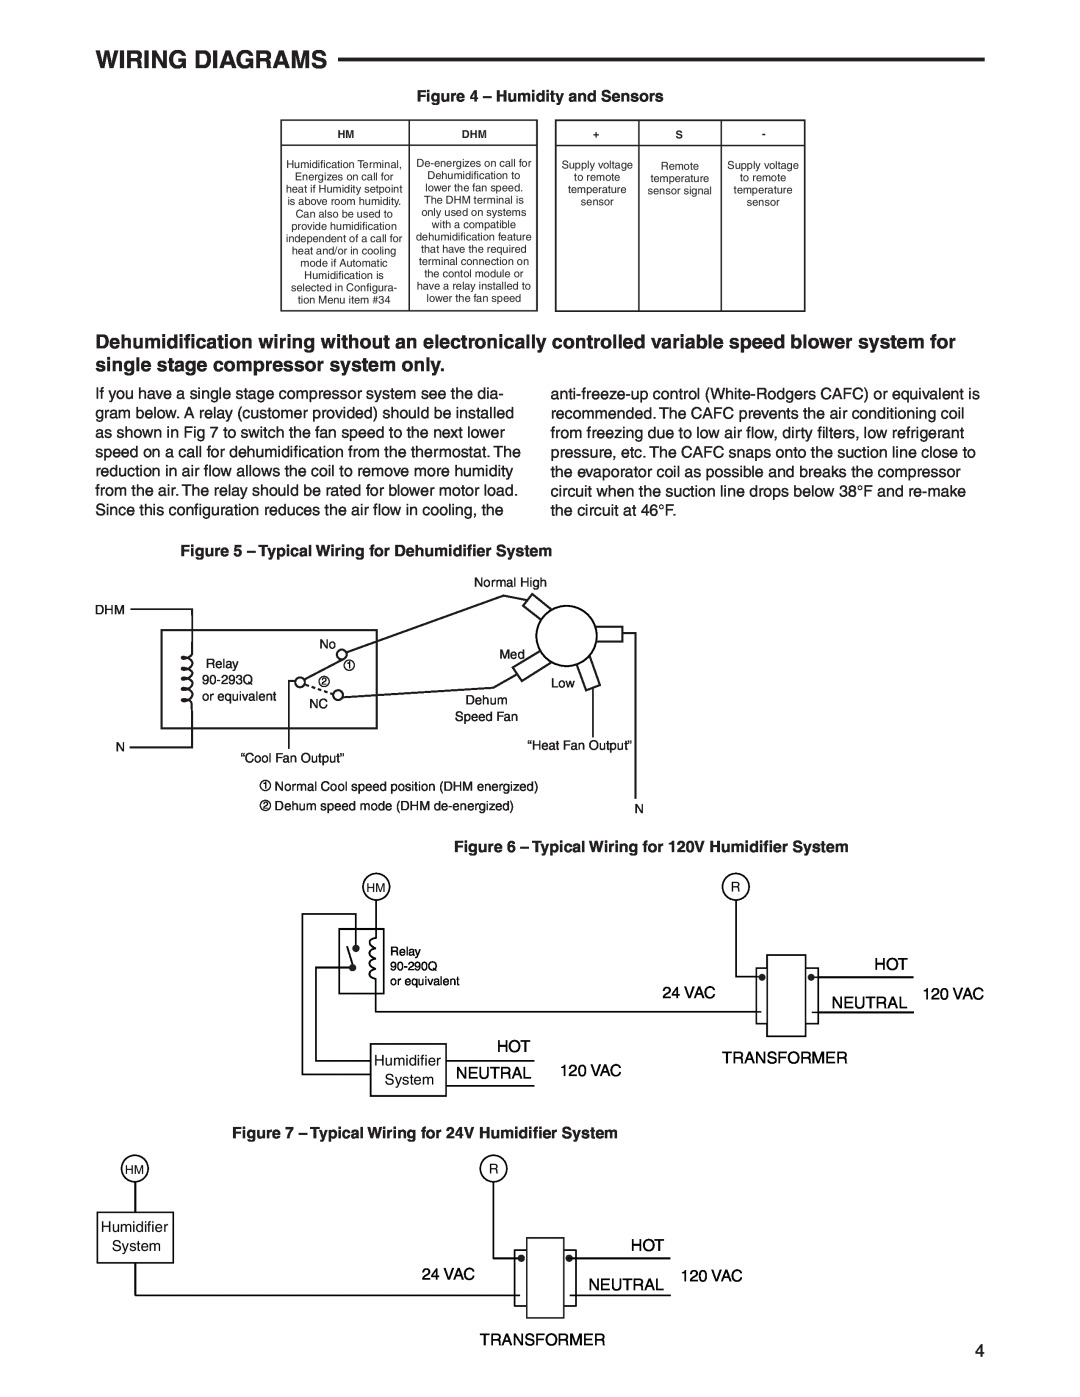 White Rodgers 1F95-1291 specifications Wiring Diagrams, 24 VAC, 120 VAC, Neutral, Transformer 